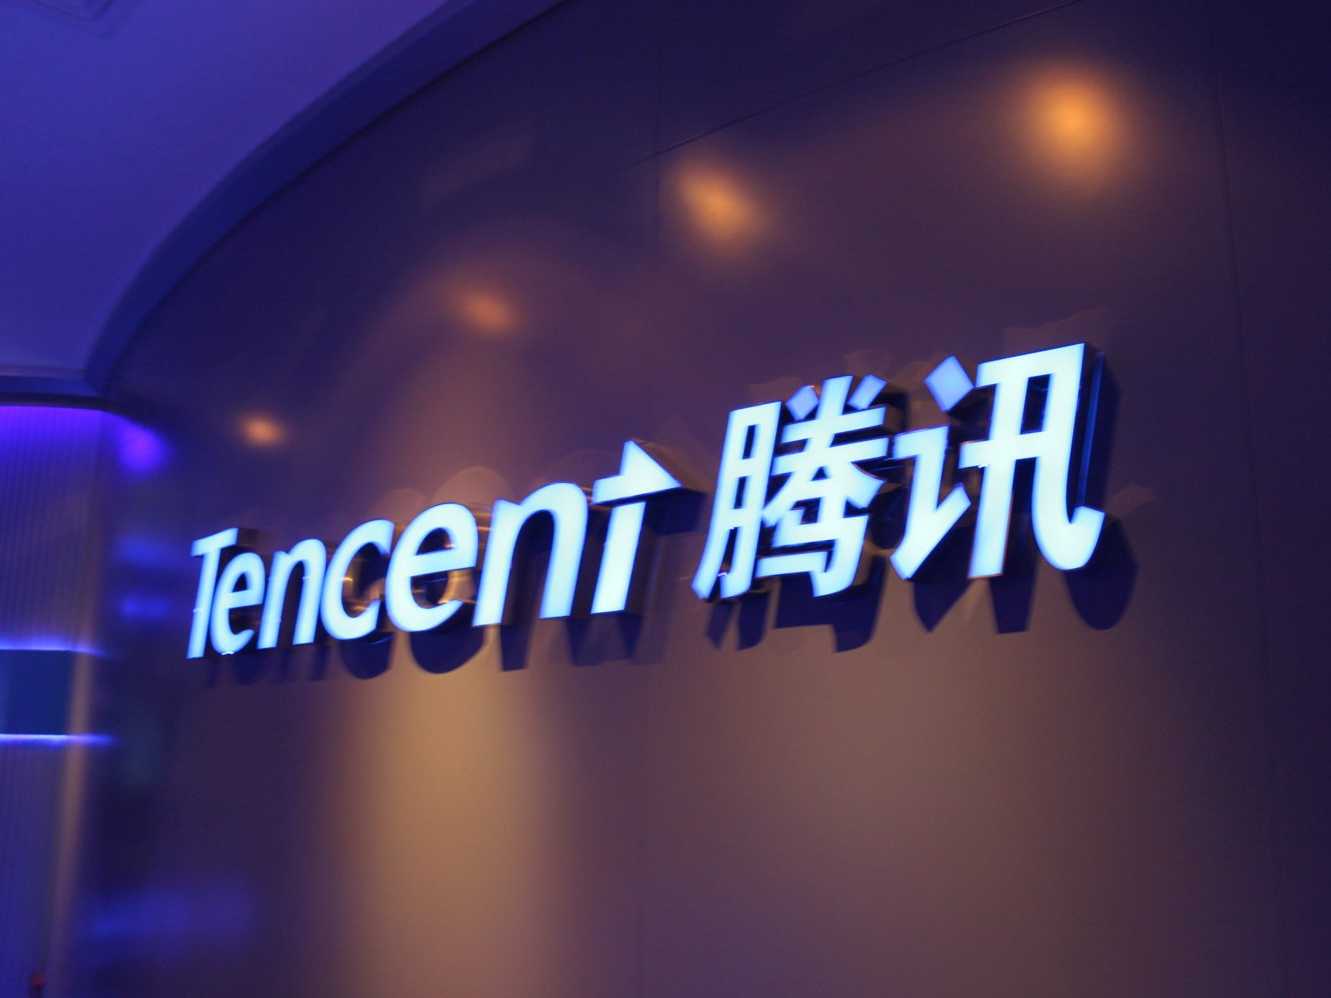 Tencent New Logo - Tencent Games and SLIVER.tv Partner Up For New 24/7 Esports Channel ...